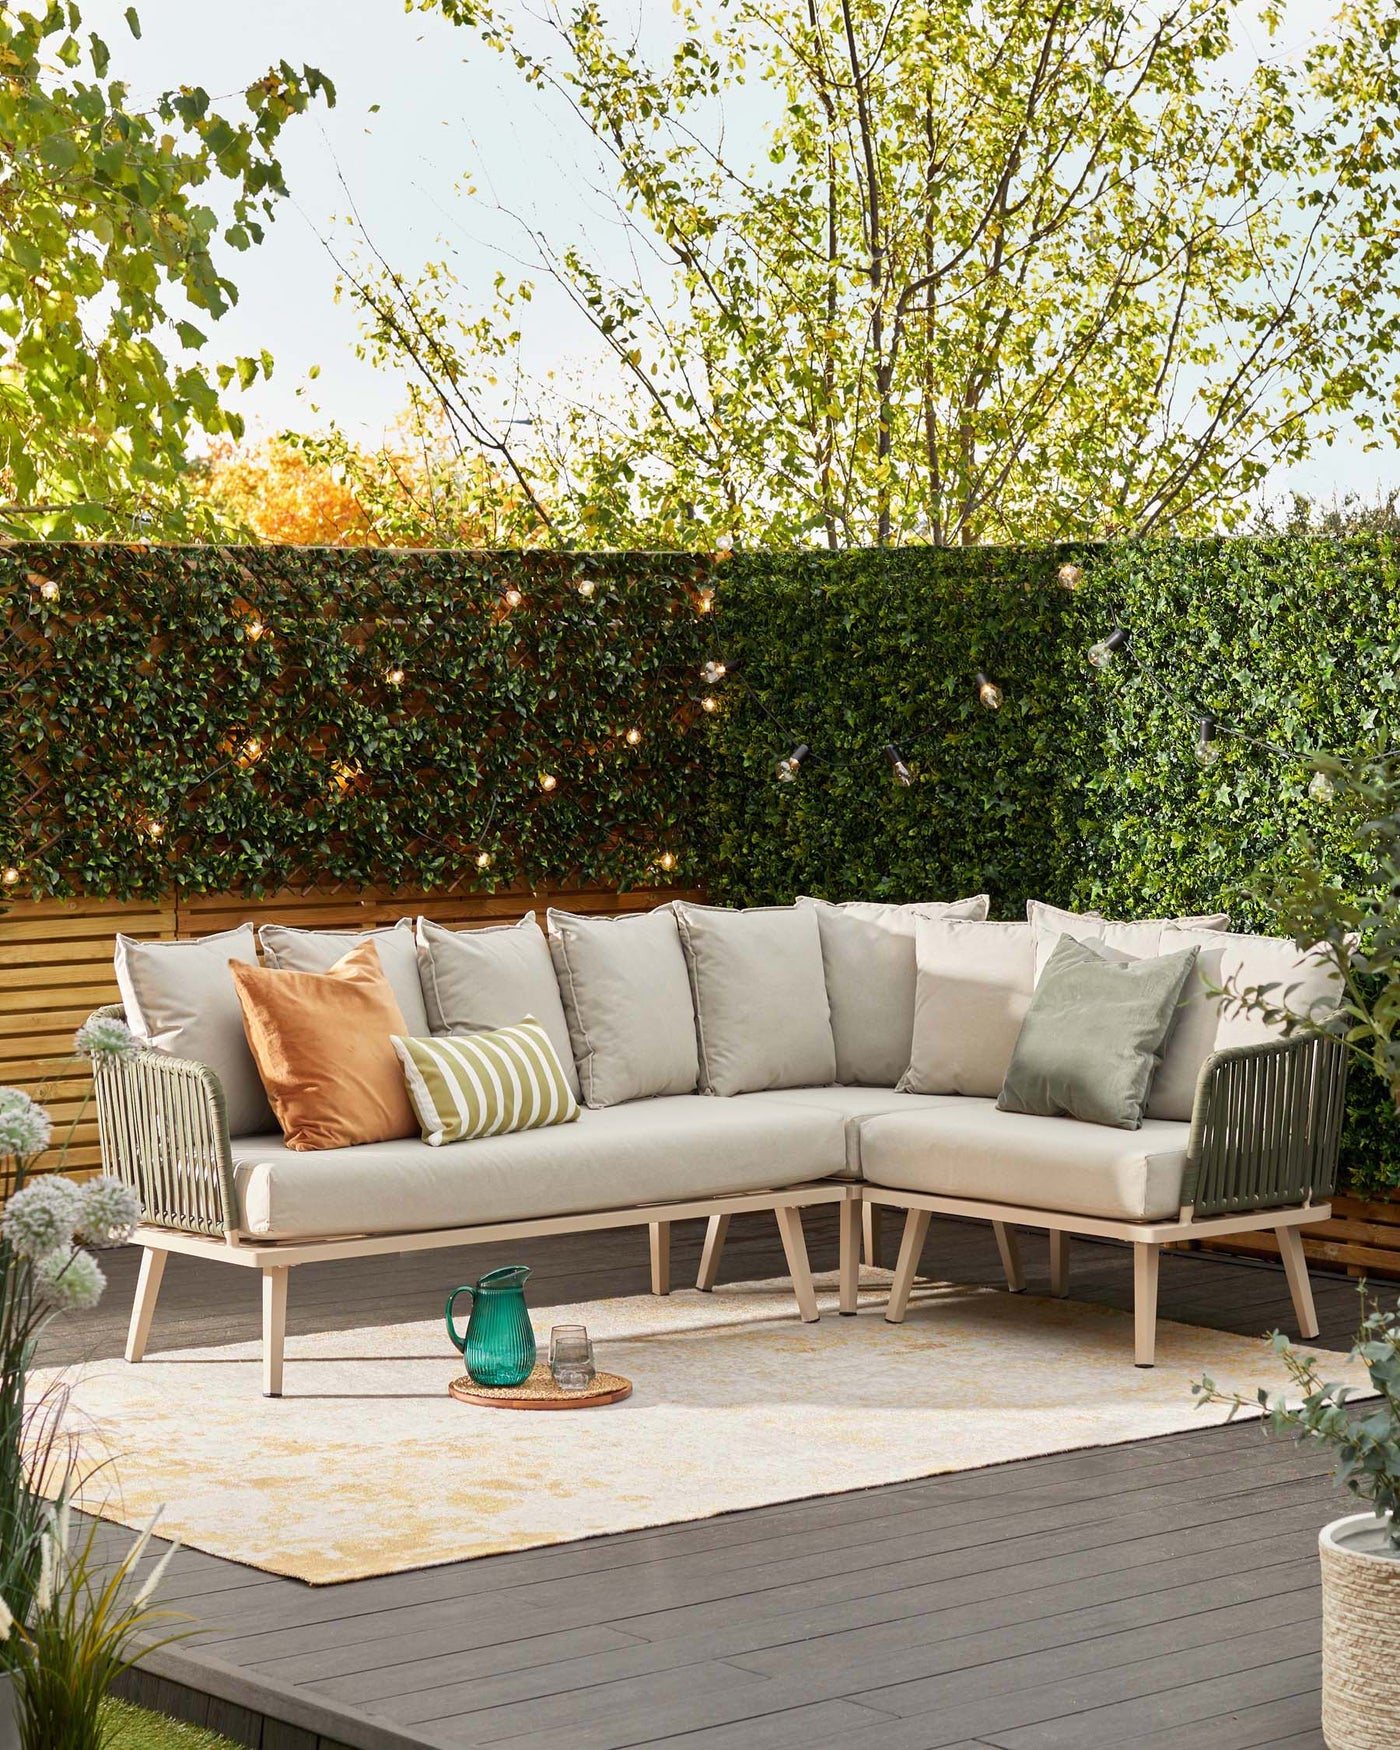 Contemporary outdoor sectional sofa with beige cushions and accent pillows in various shades of green and beige, positioned on a patterned cream rug. A blue-green glass lantern and small glass are set on a round rattan tray, placed on the wooden deck next to the sofa.